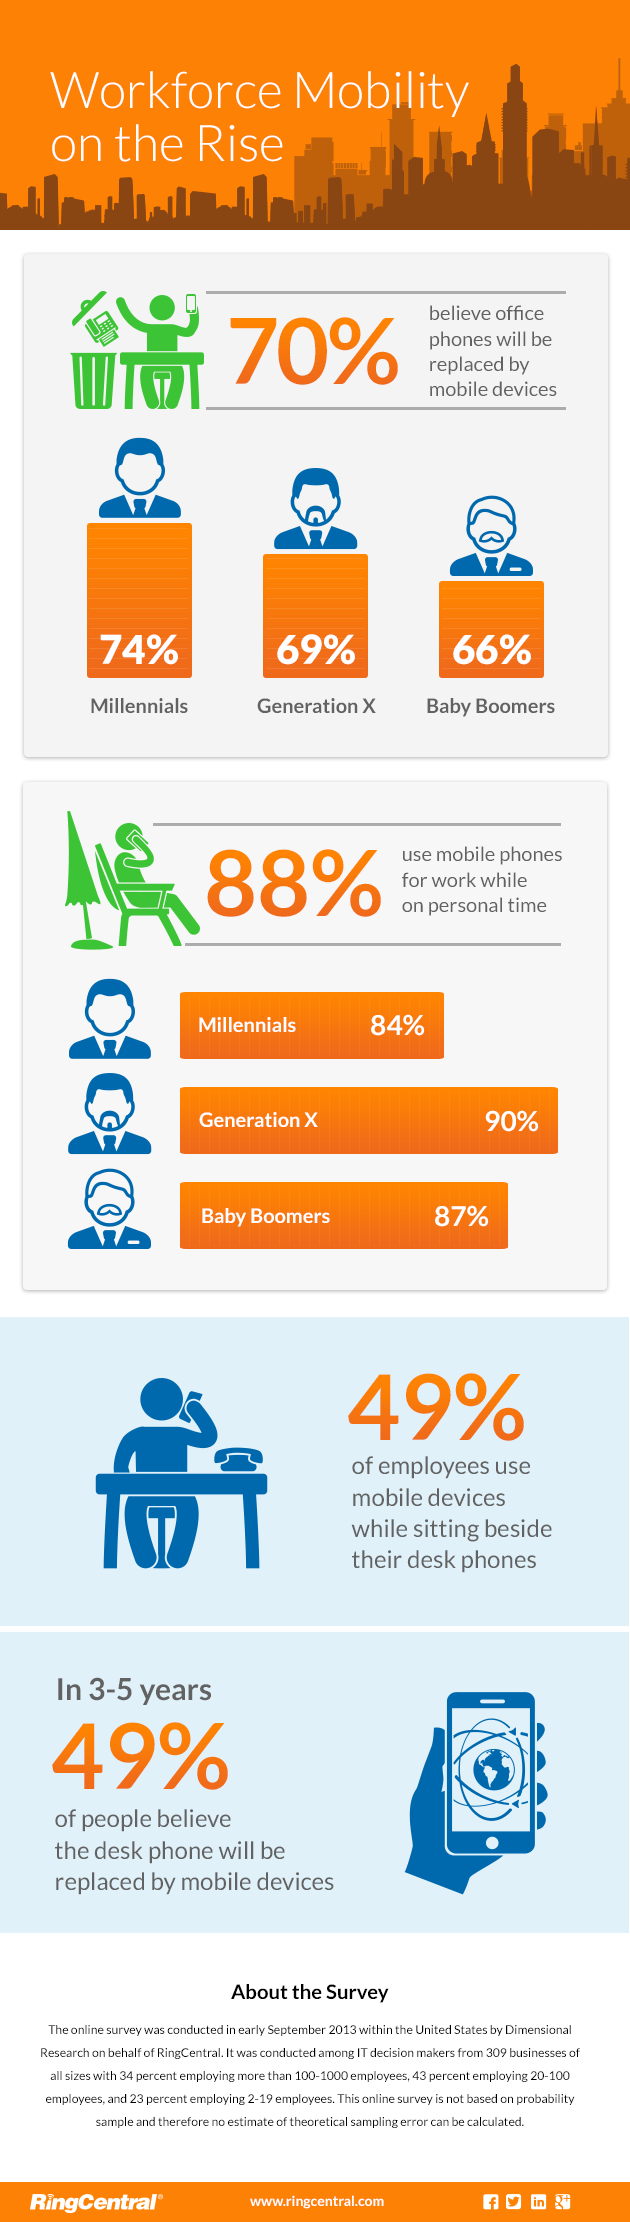 Workforce Mobility on the Rise Visual.ly